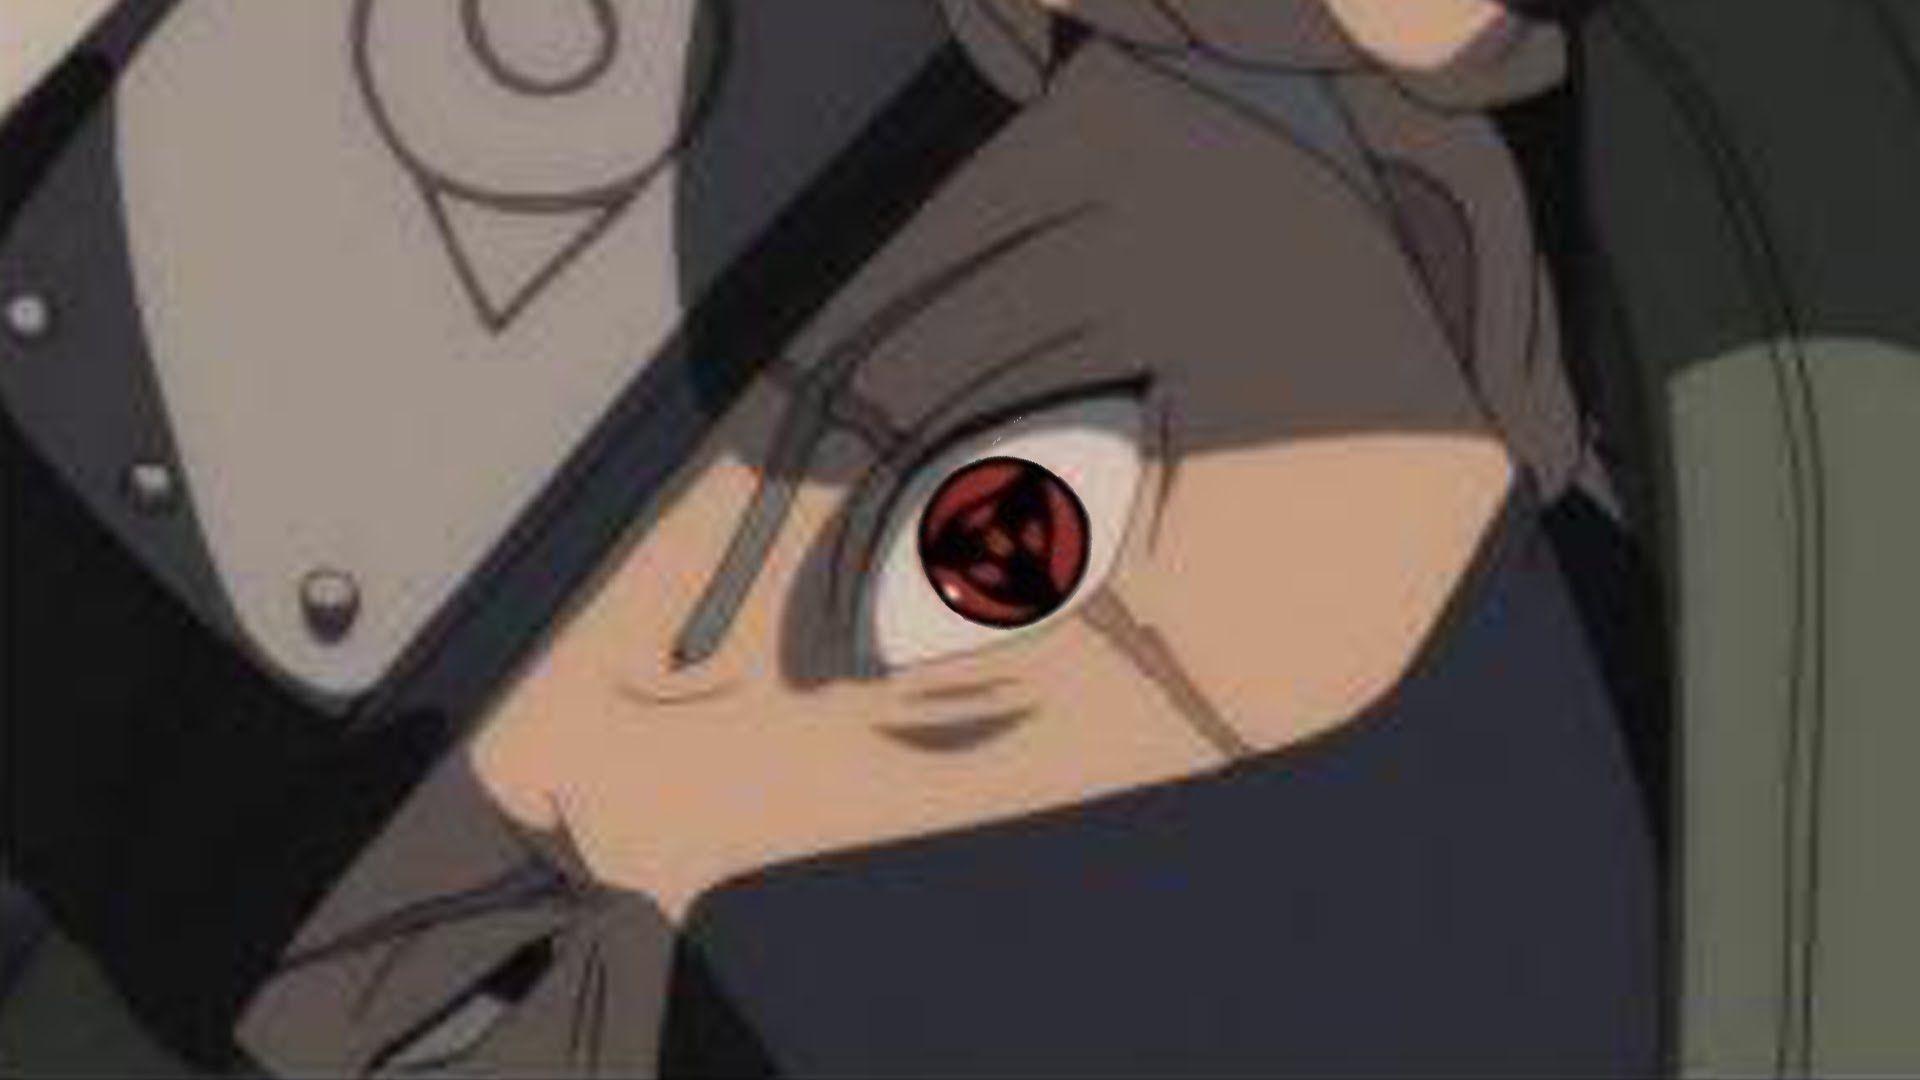 Kakashi Mangekyou Sharingan Wallpapers Wallpaper Cave Download, share or upload your own one! kakashi mangekyou sharingan wallpapers